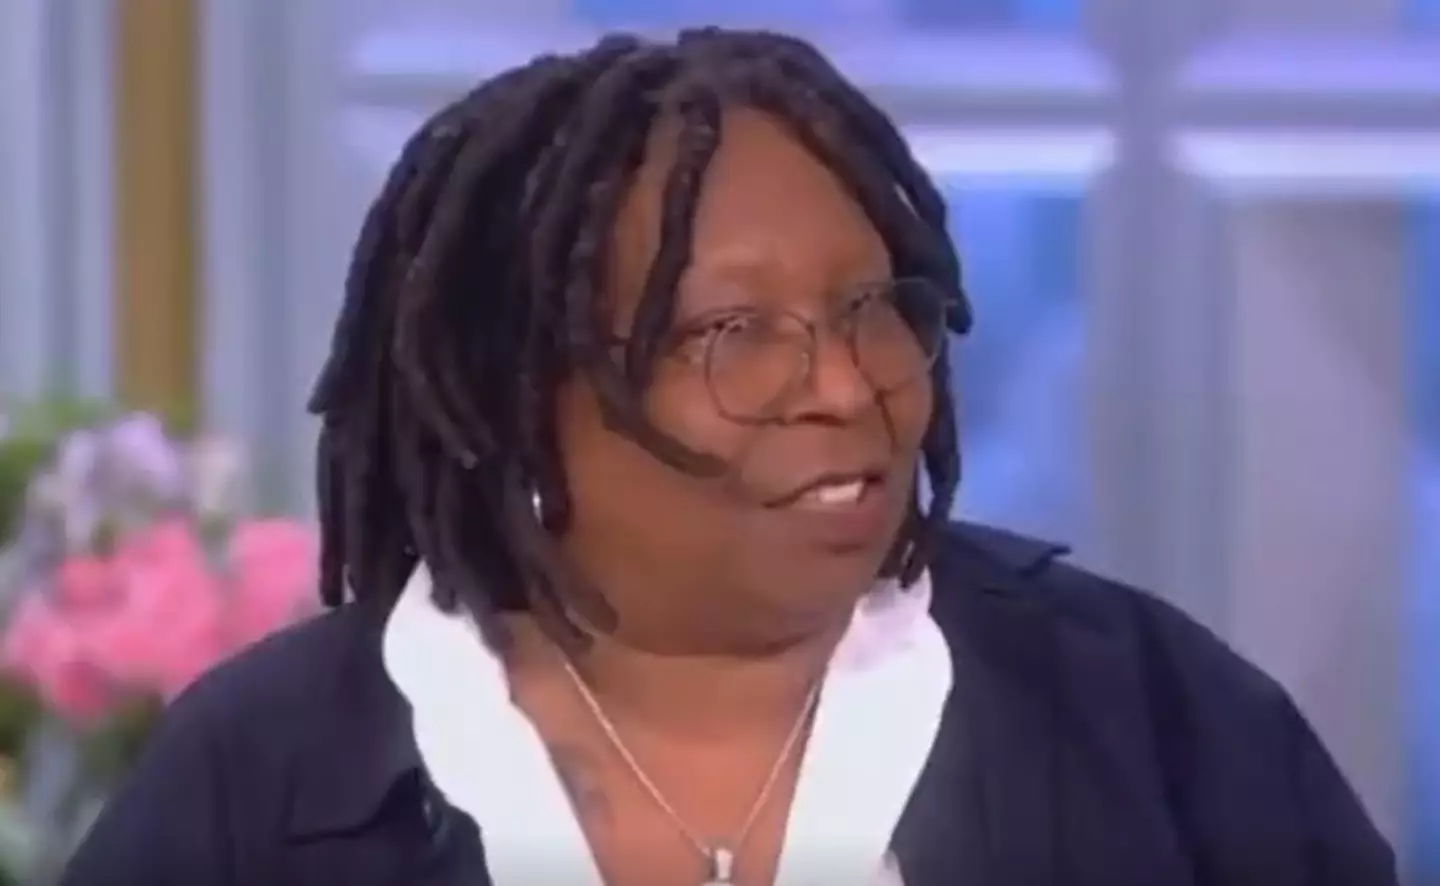 Whoopi Goldberg made the initial comments earlier in 2022.